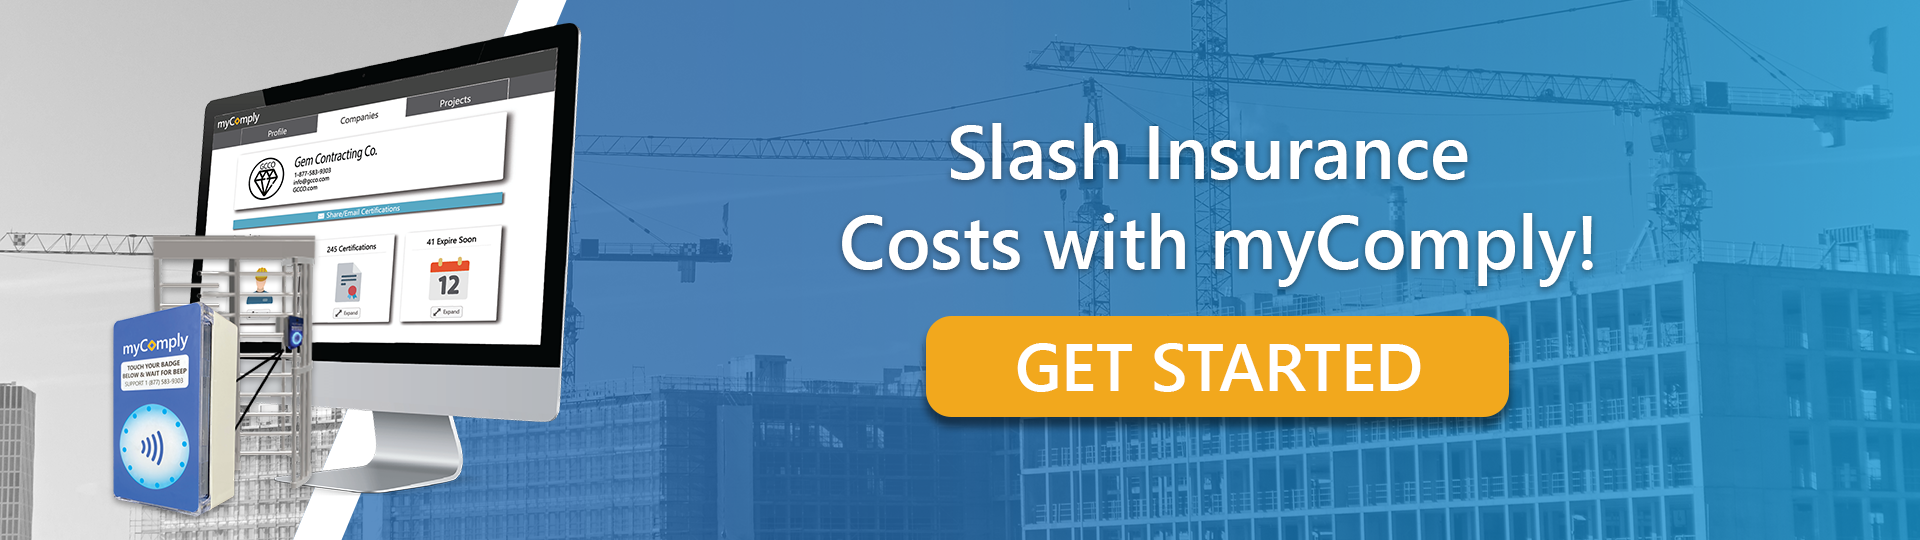 Slash Insurance Costs with myComply